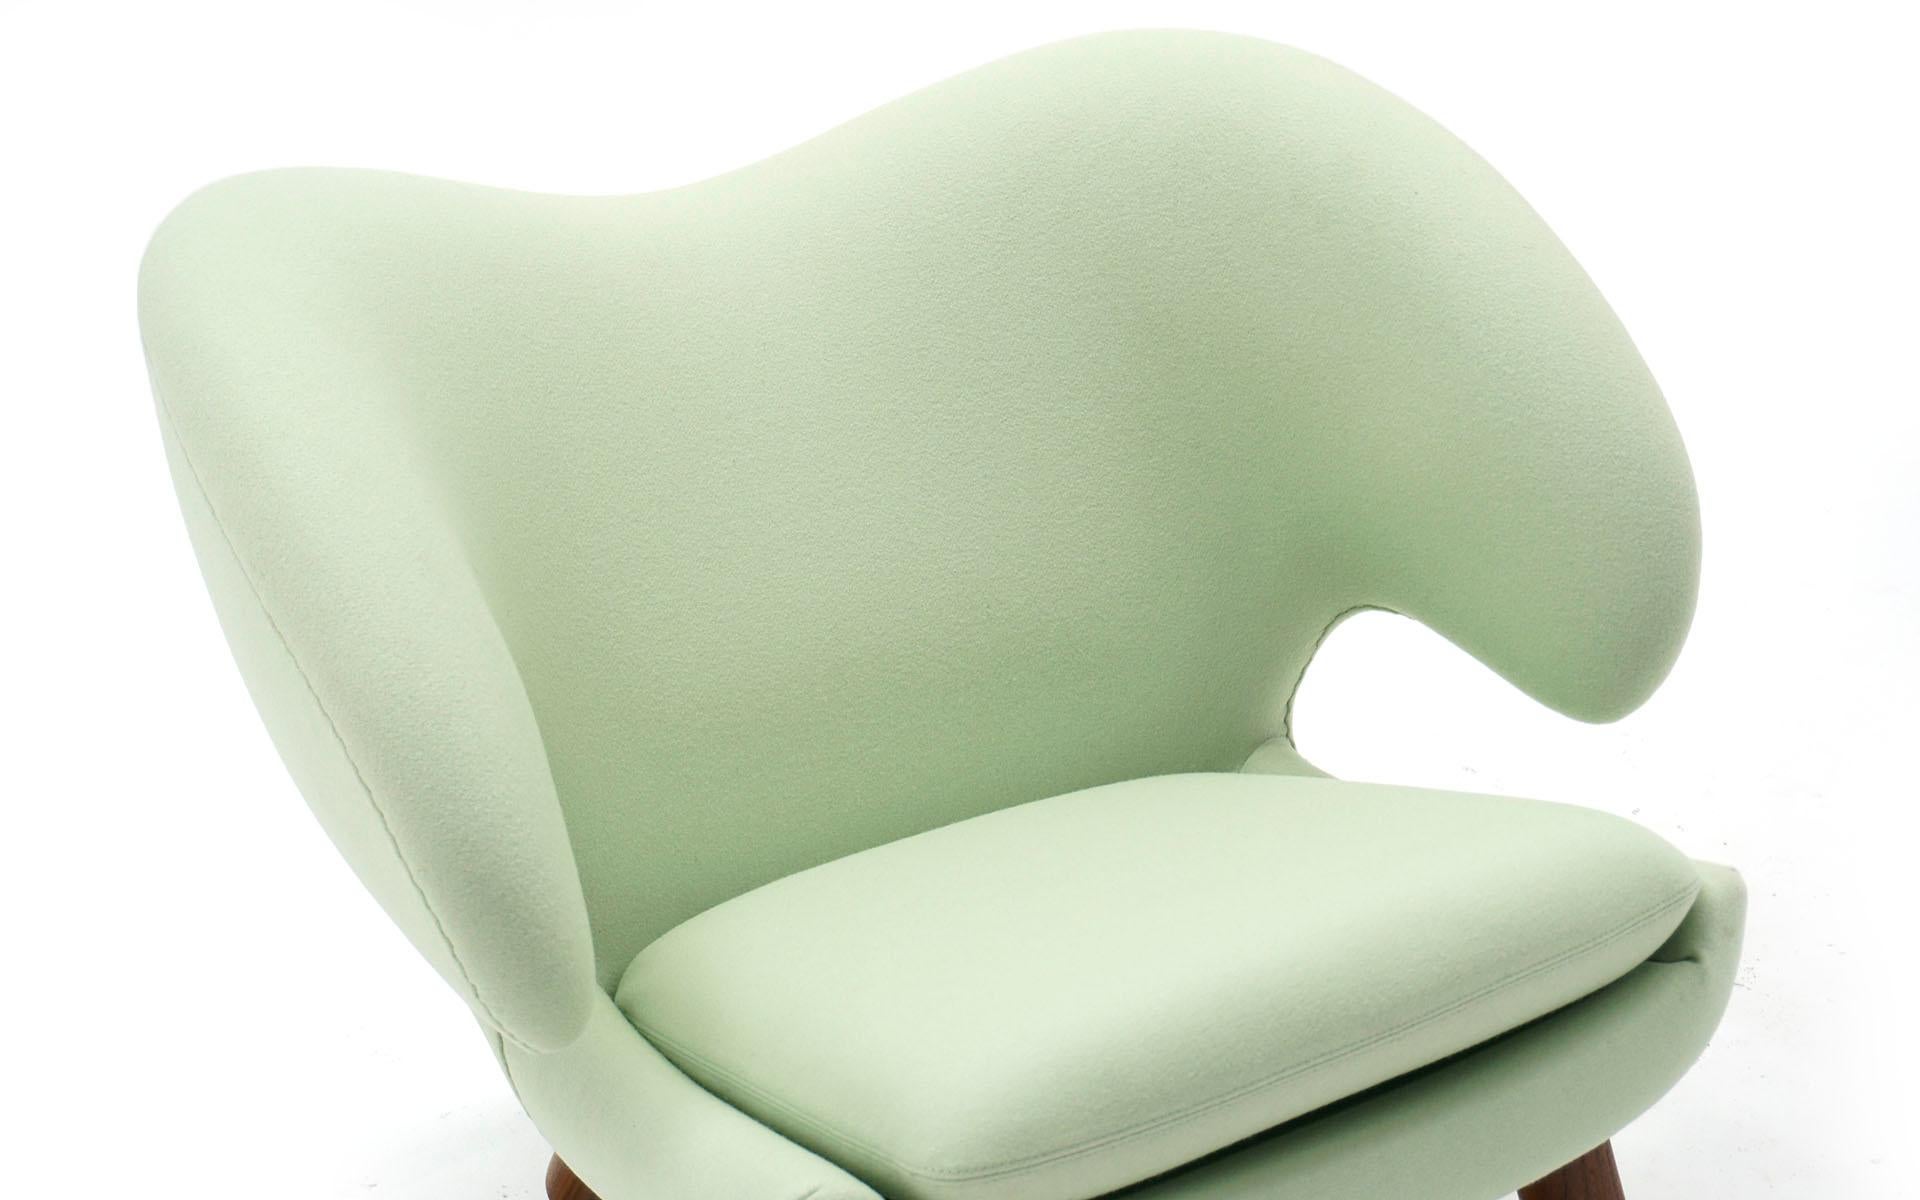 Contemporary Authentic Finn Juhl Pelican Chair by Onecollection, Denmark, Light Mint Green